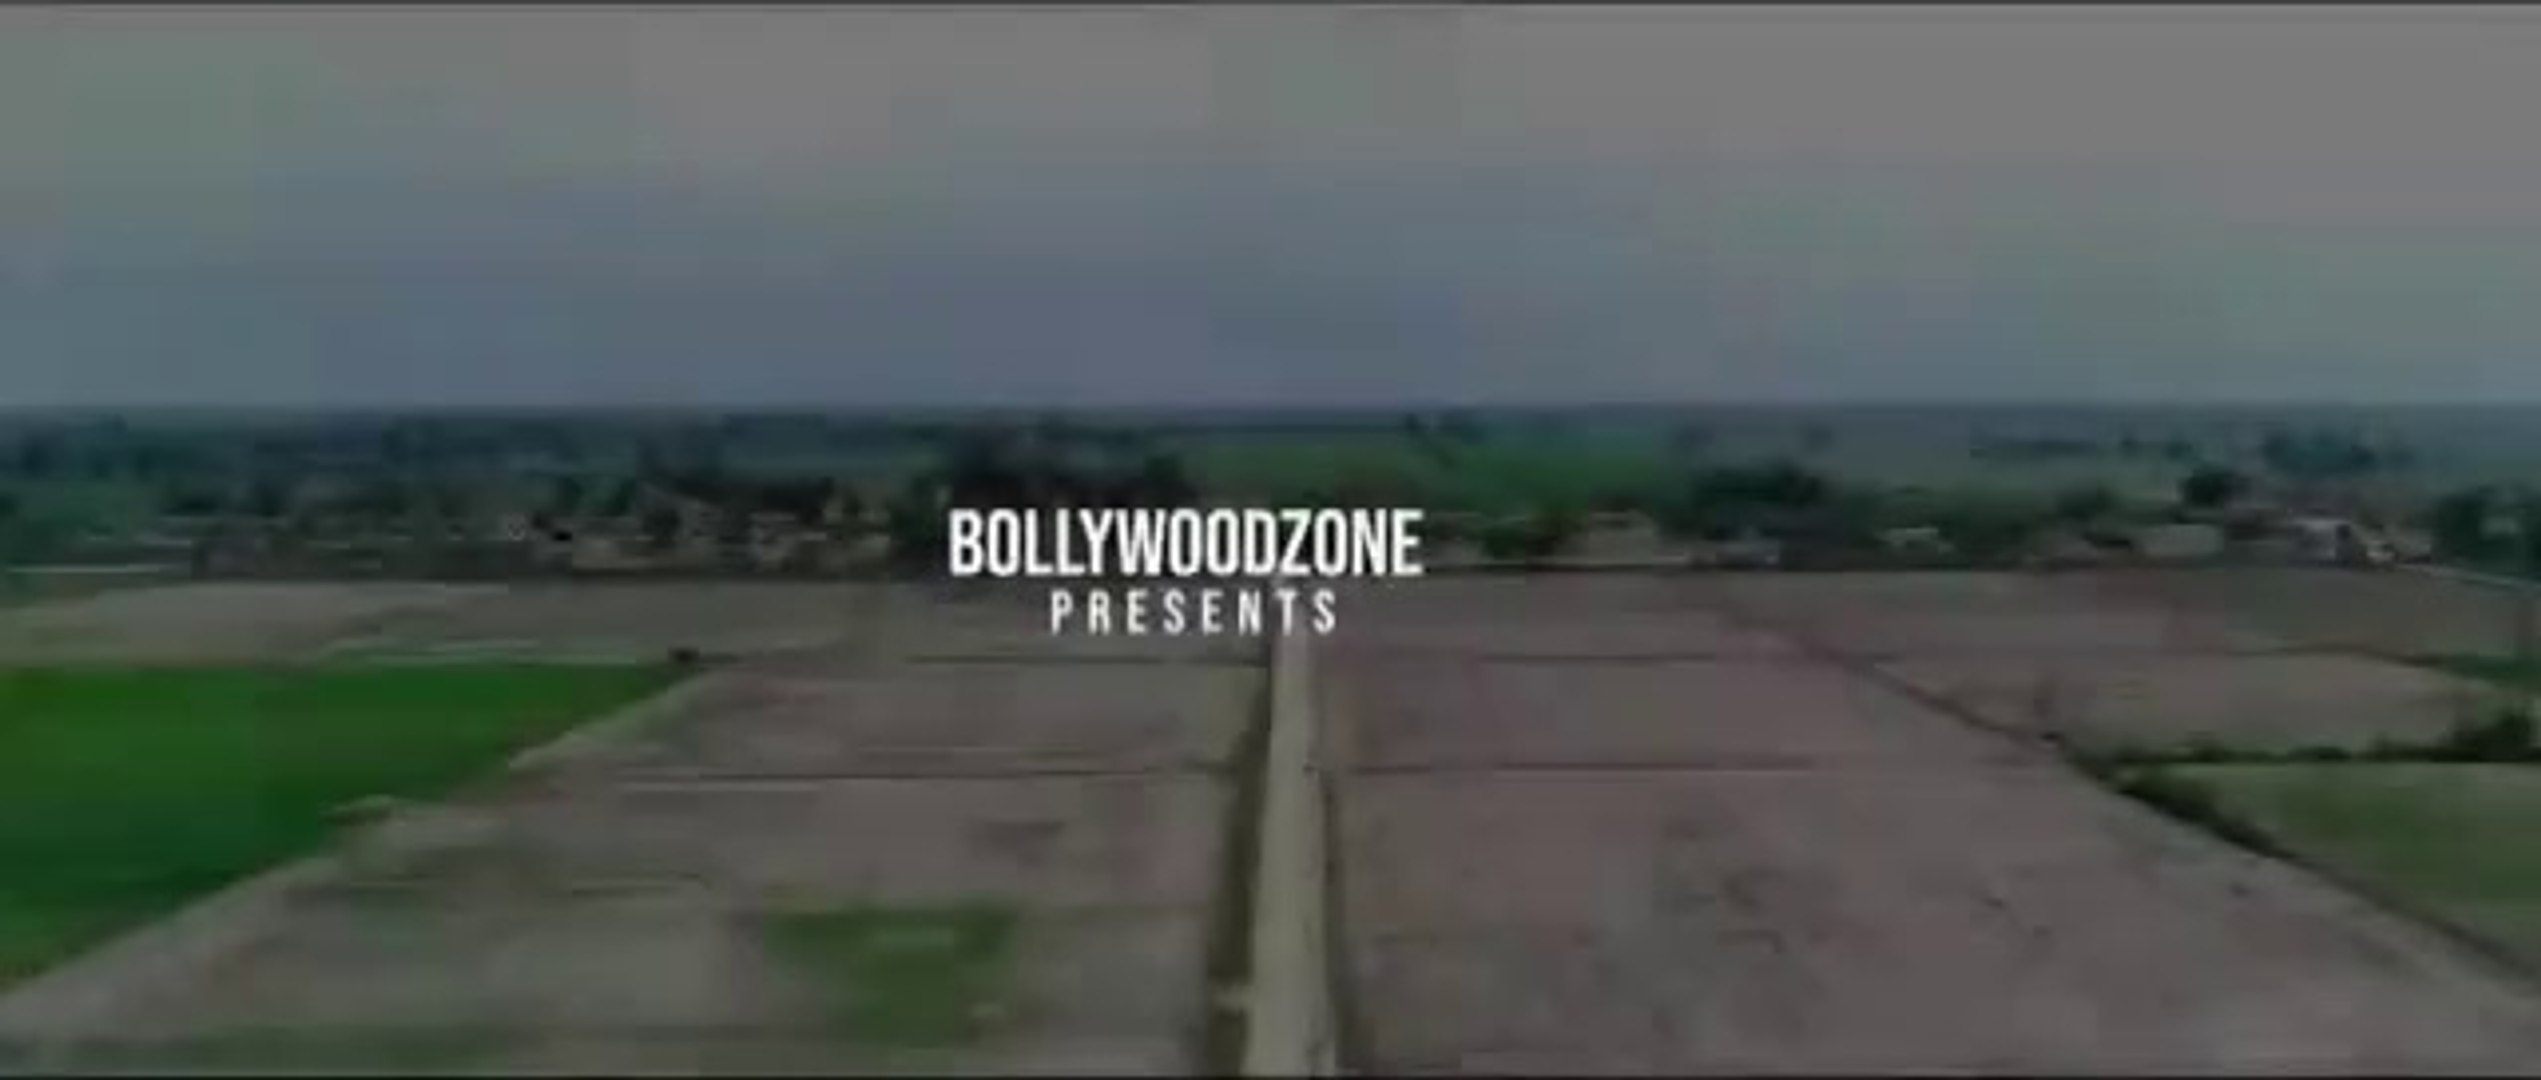 New Bollywood super hit song.